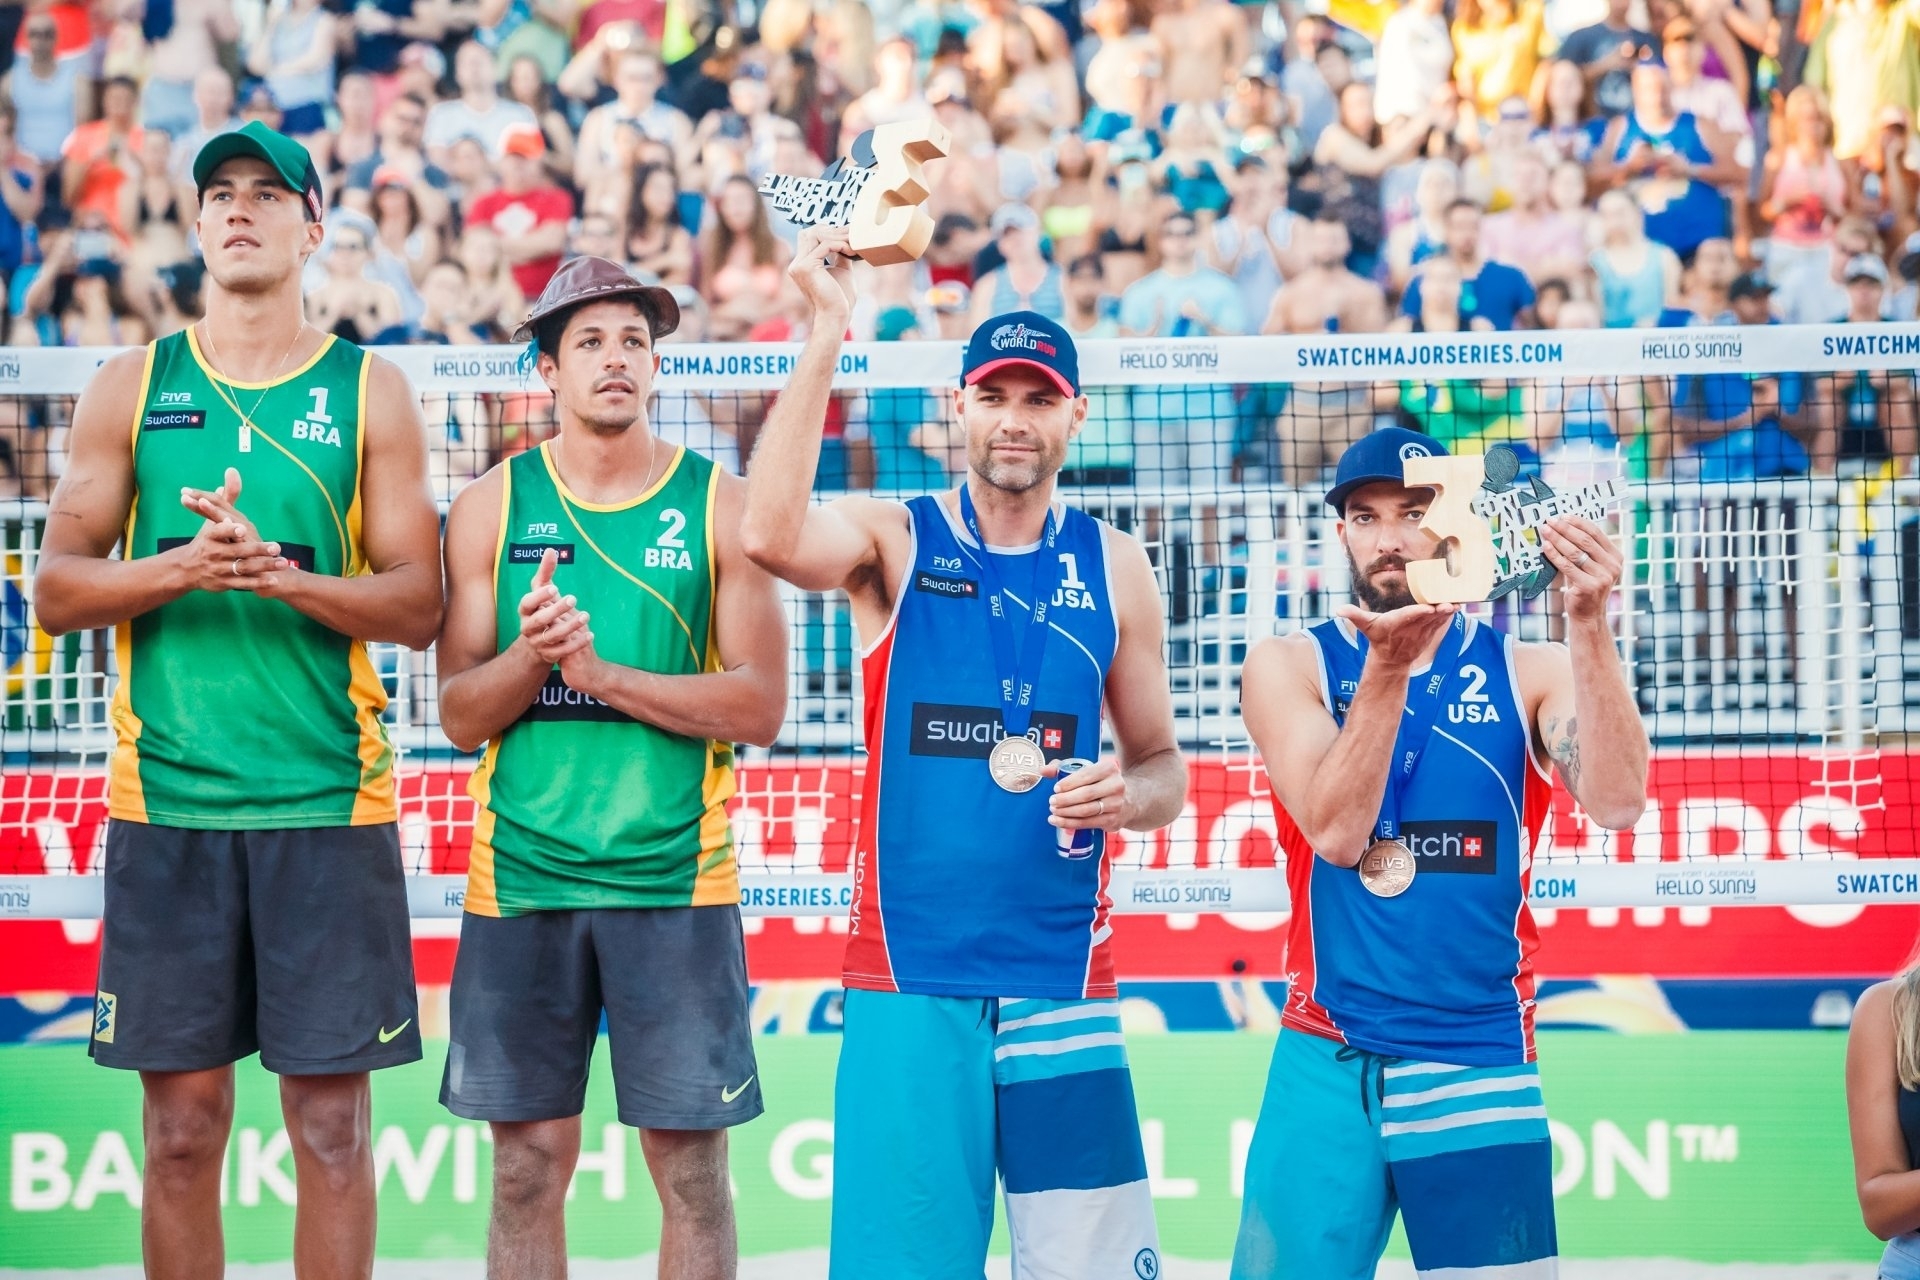 Will Lucena/Dalhausser (right) be smiling this year, or will Alvaro/Saymon (left) top the podium again?